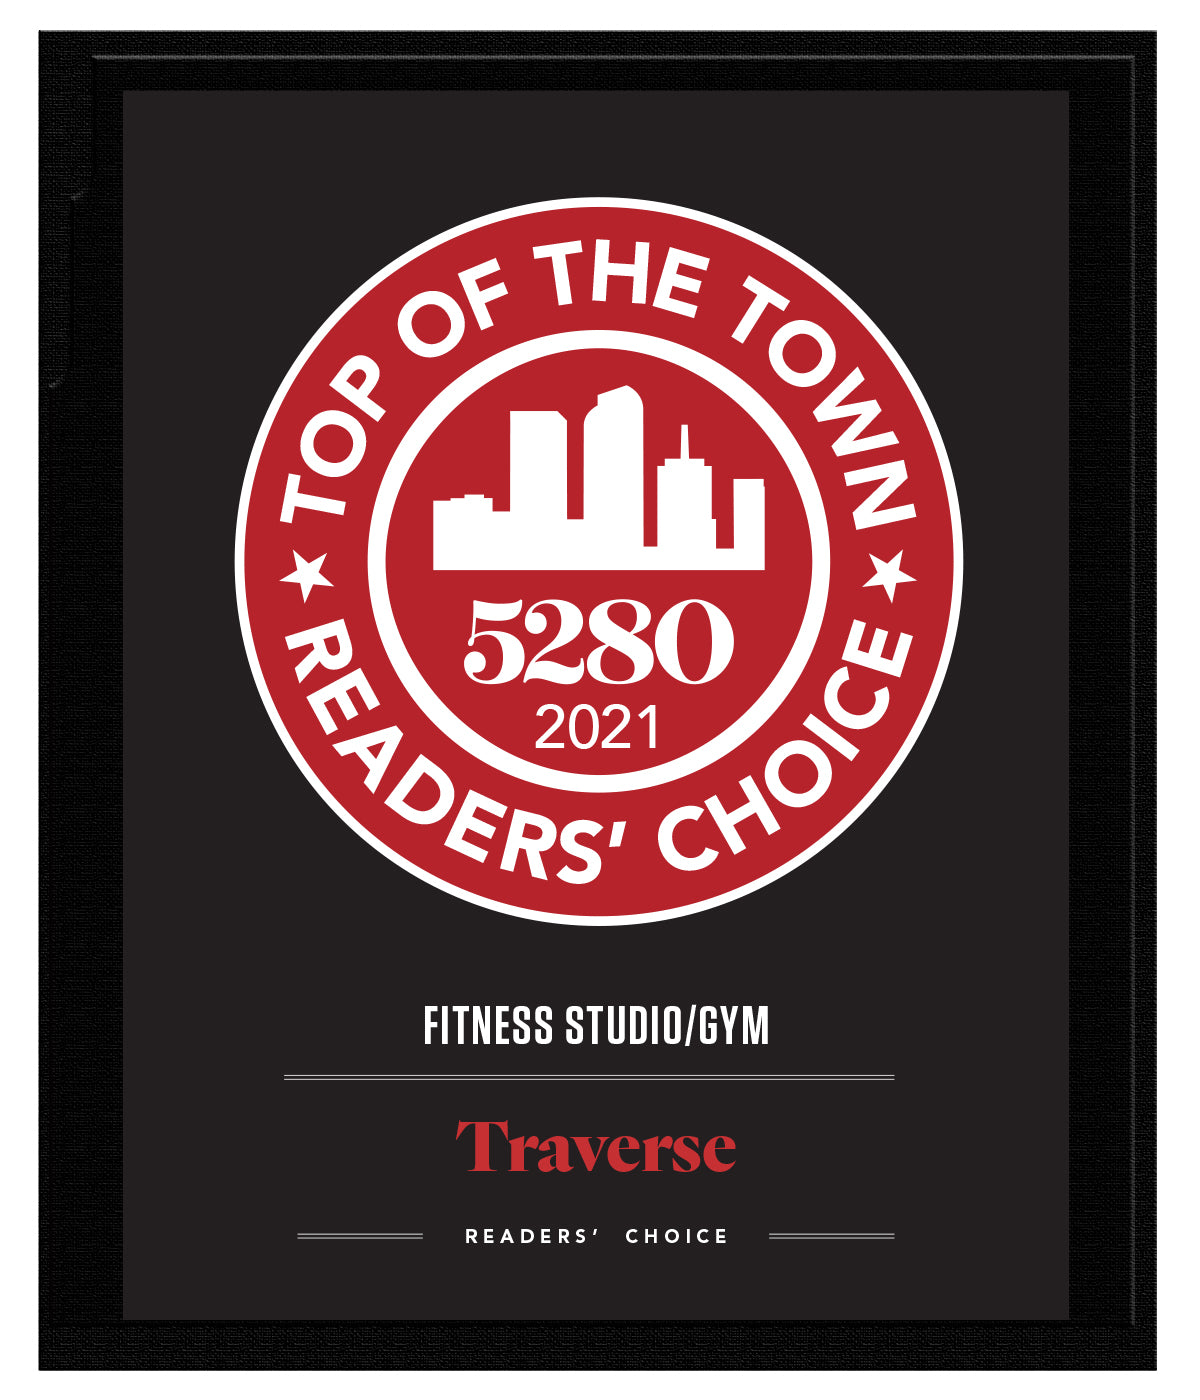 2021 Top of the Town Plaque Readers’ Choice 5280